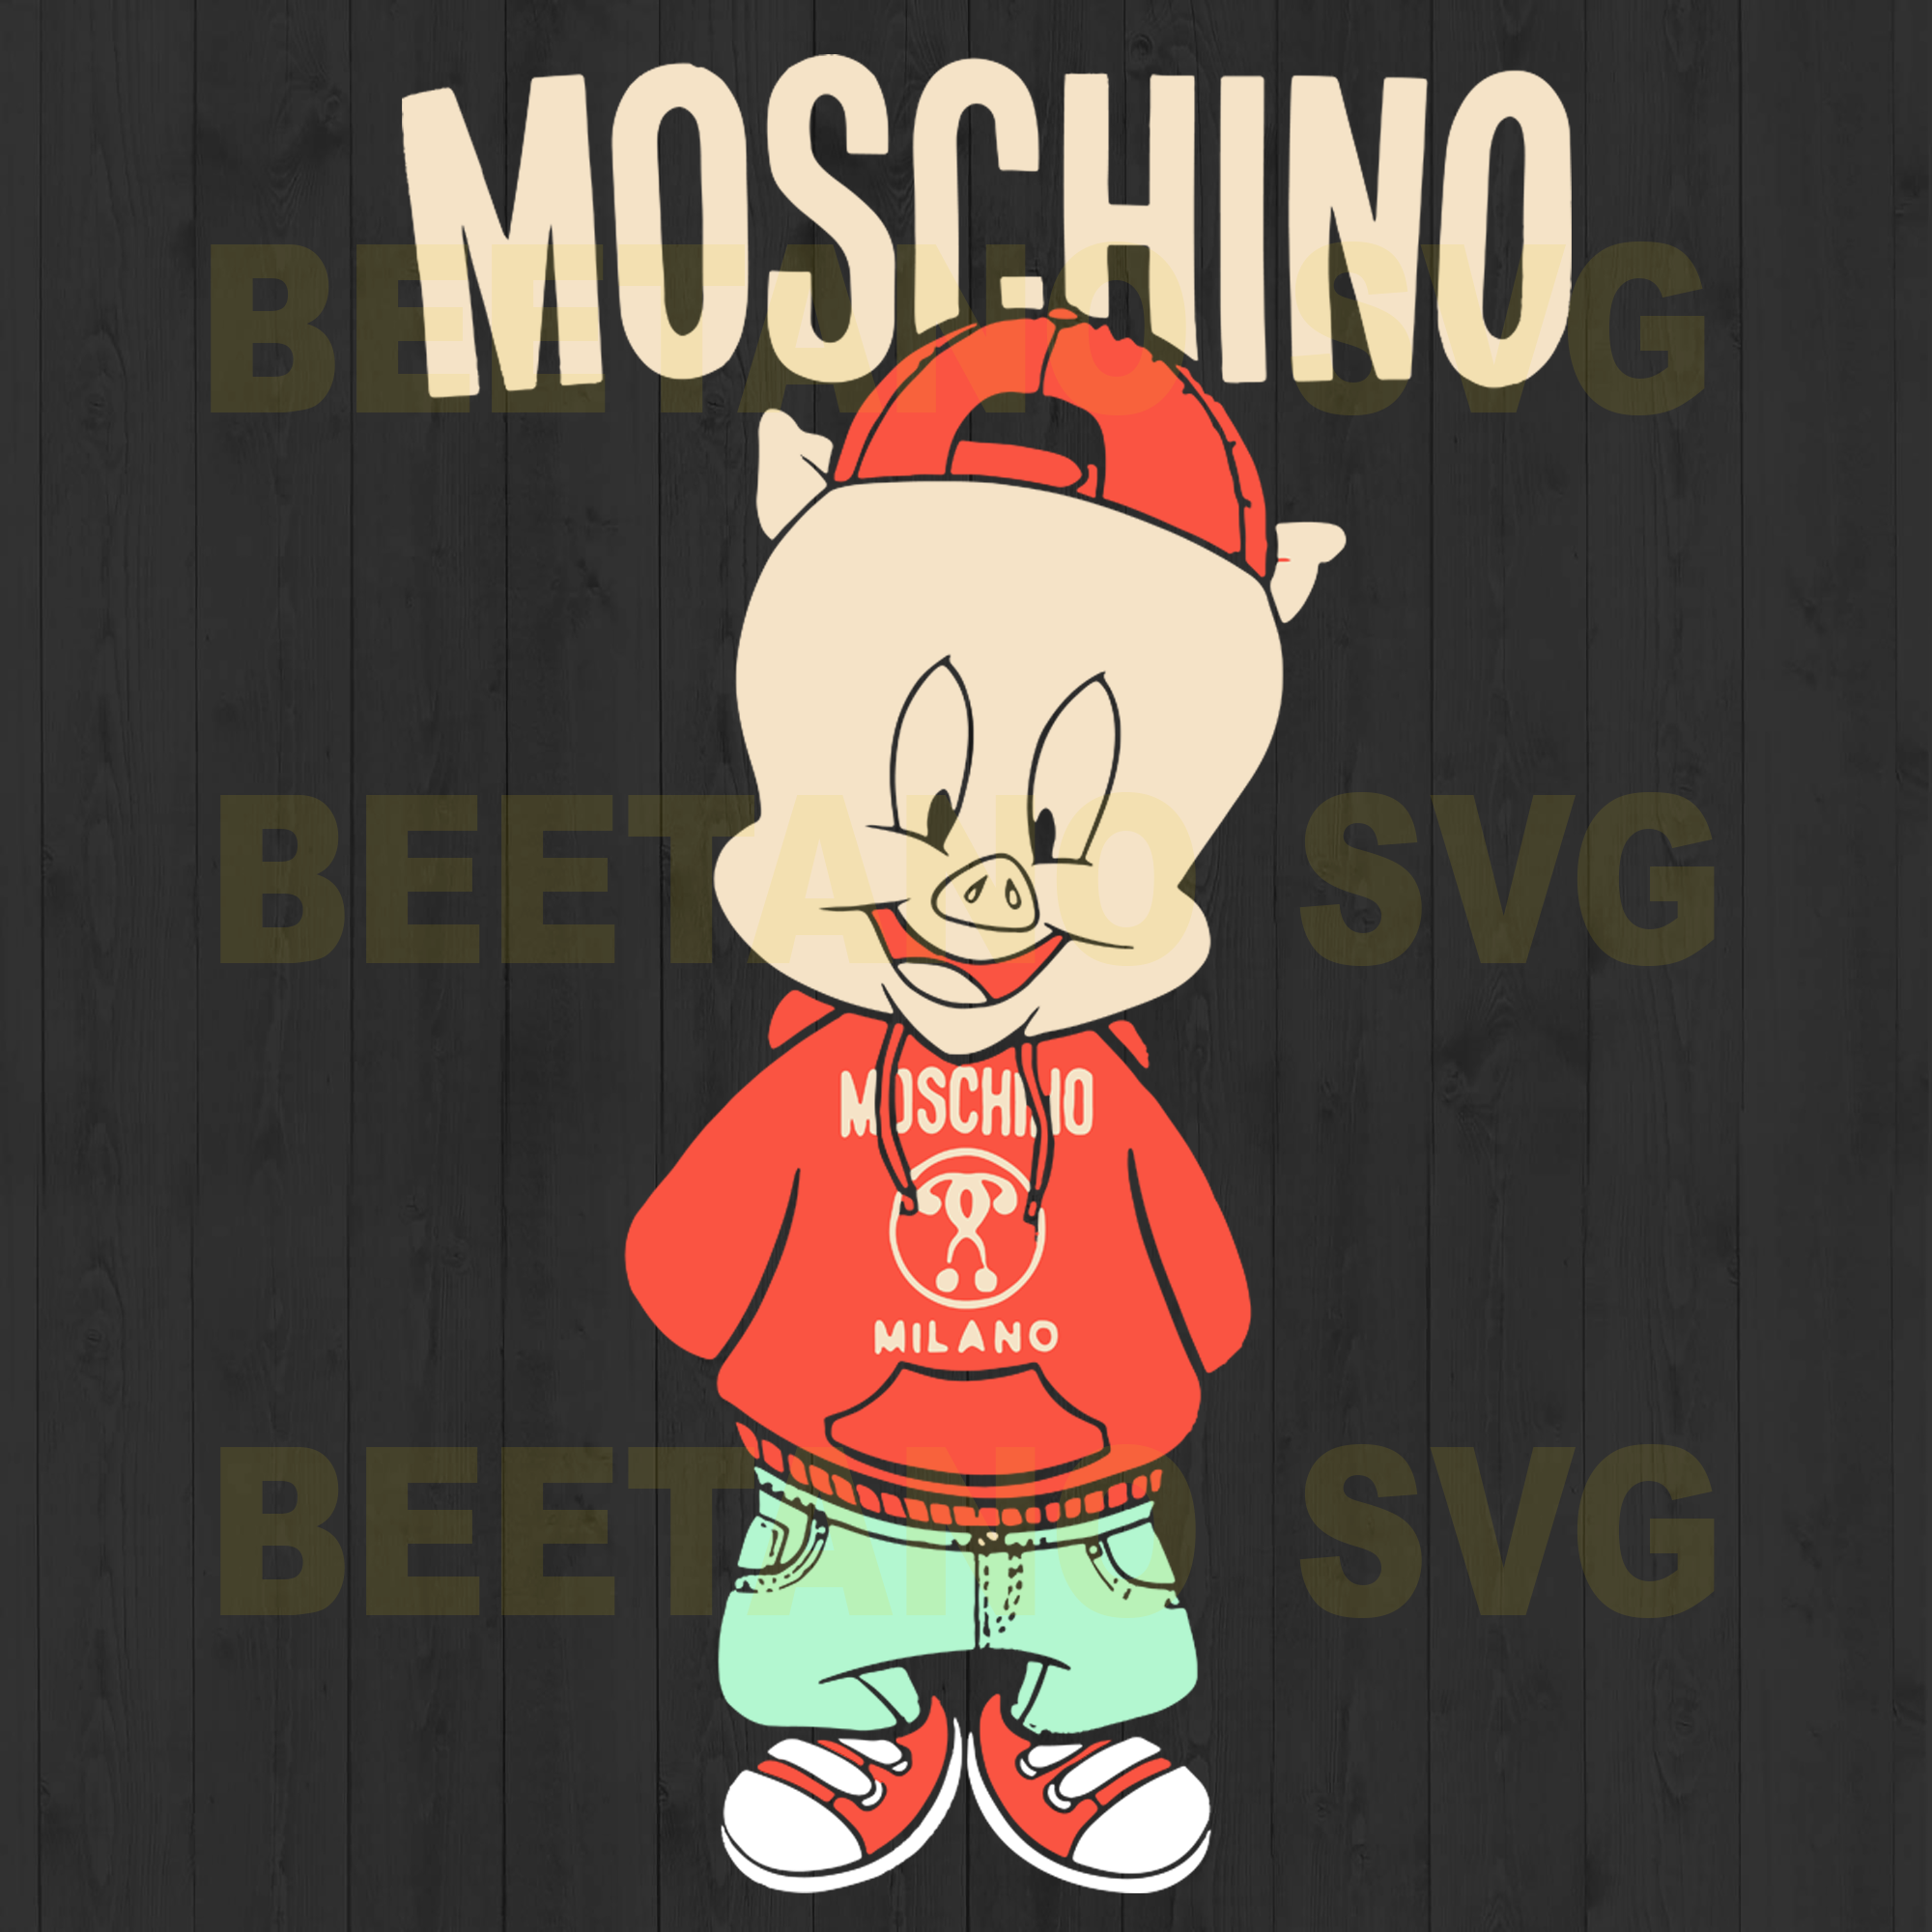 Download Porky Pig Moschino Svg Files Porky Pig Cutting Files For Cricut Svg Beetanosvg Scalable Vector Graphics